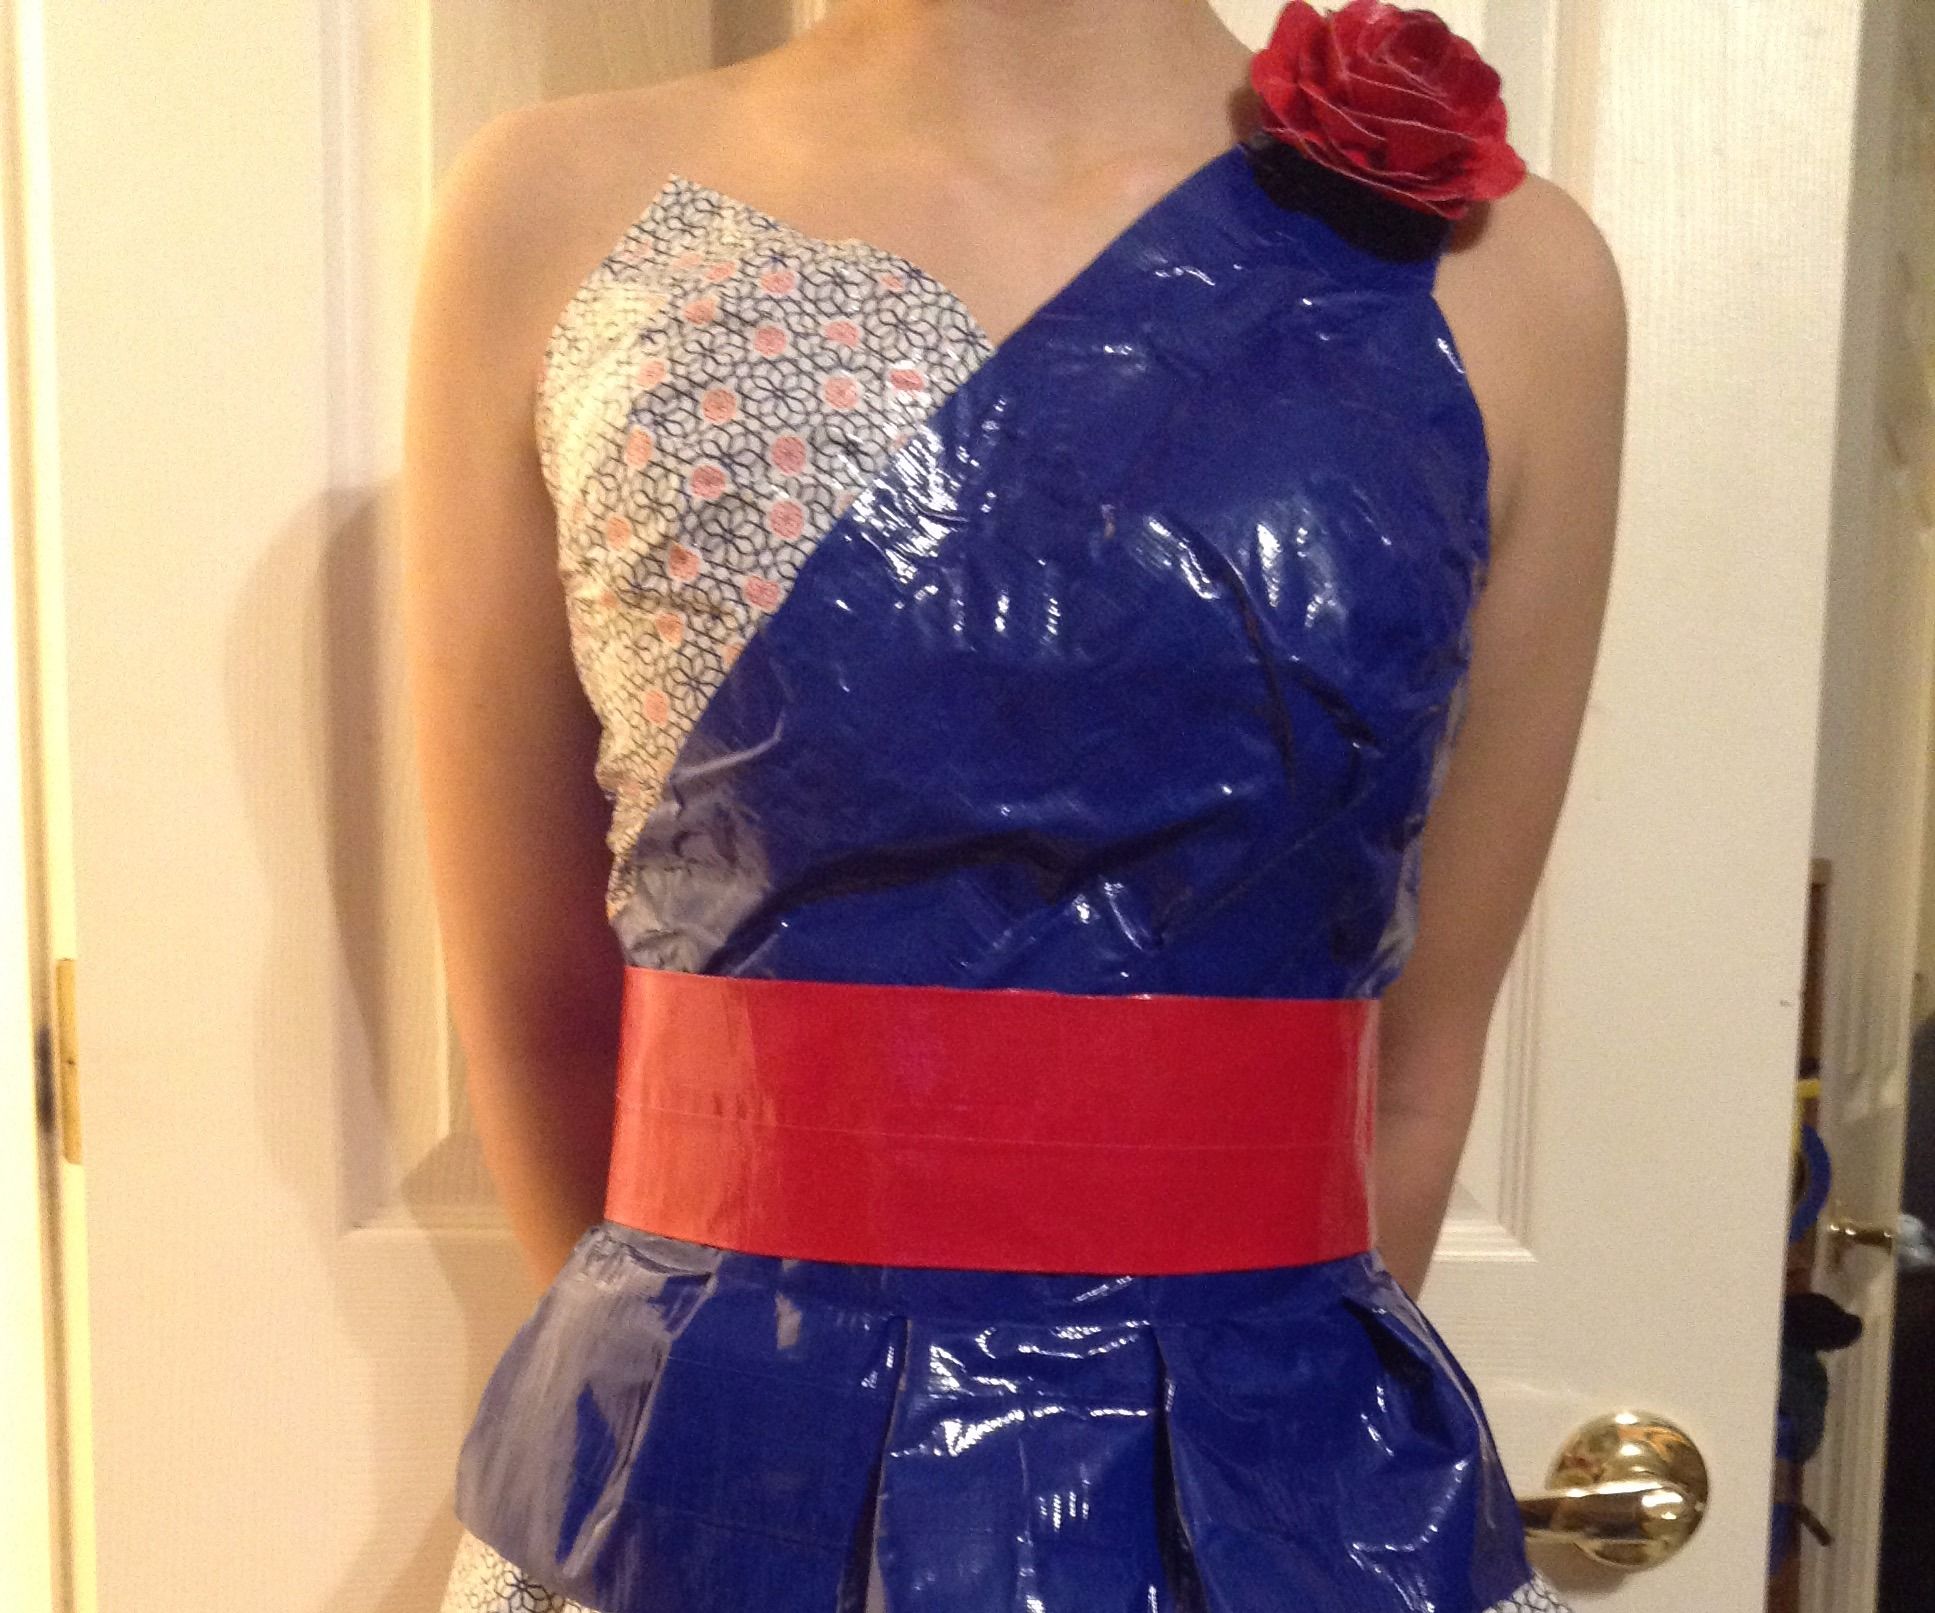 How to Make a Duct Tape Dress in 10 Steps